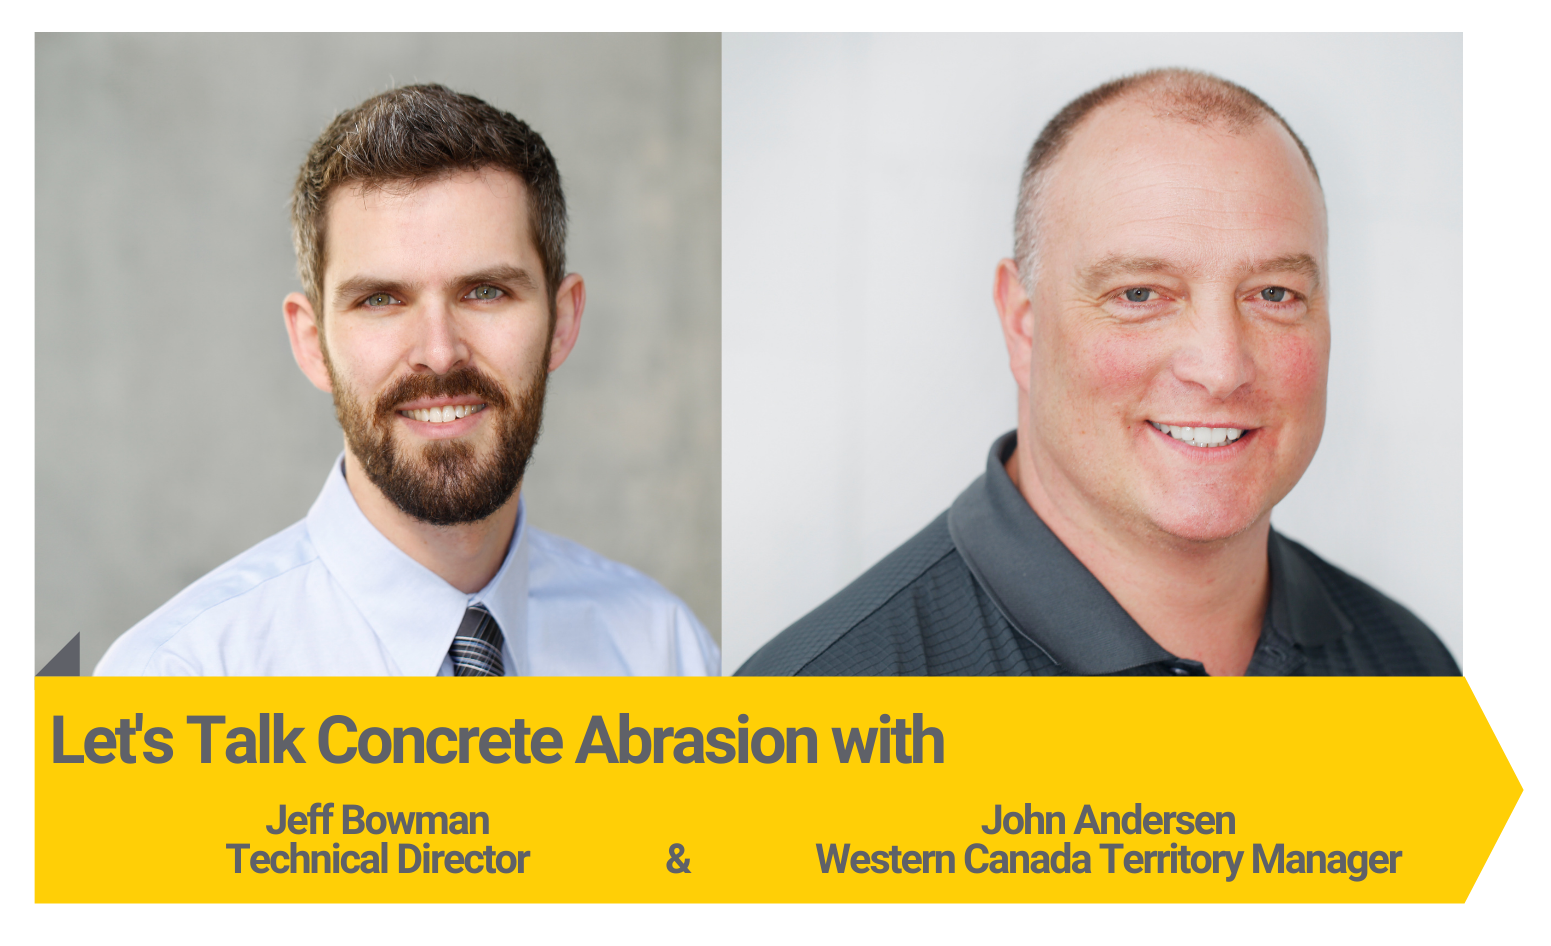 Let's talk concrete abrasion with Technical Director Jeff Bowman and Western Canada Territory Manager John Andersen.